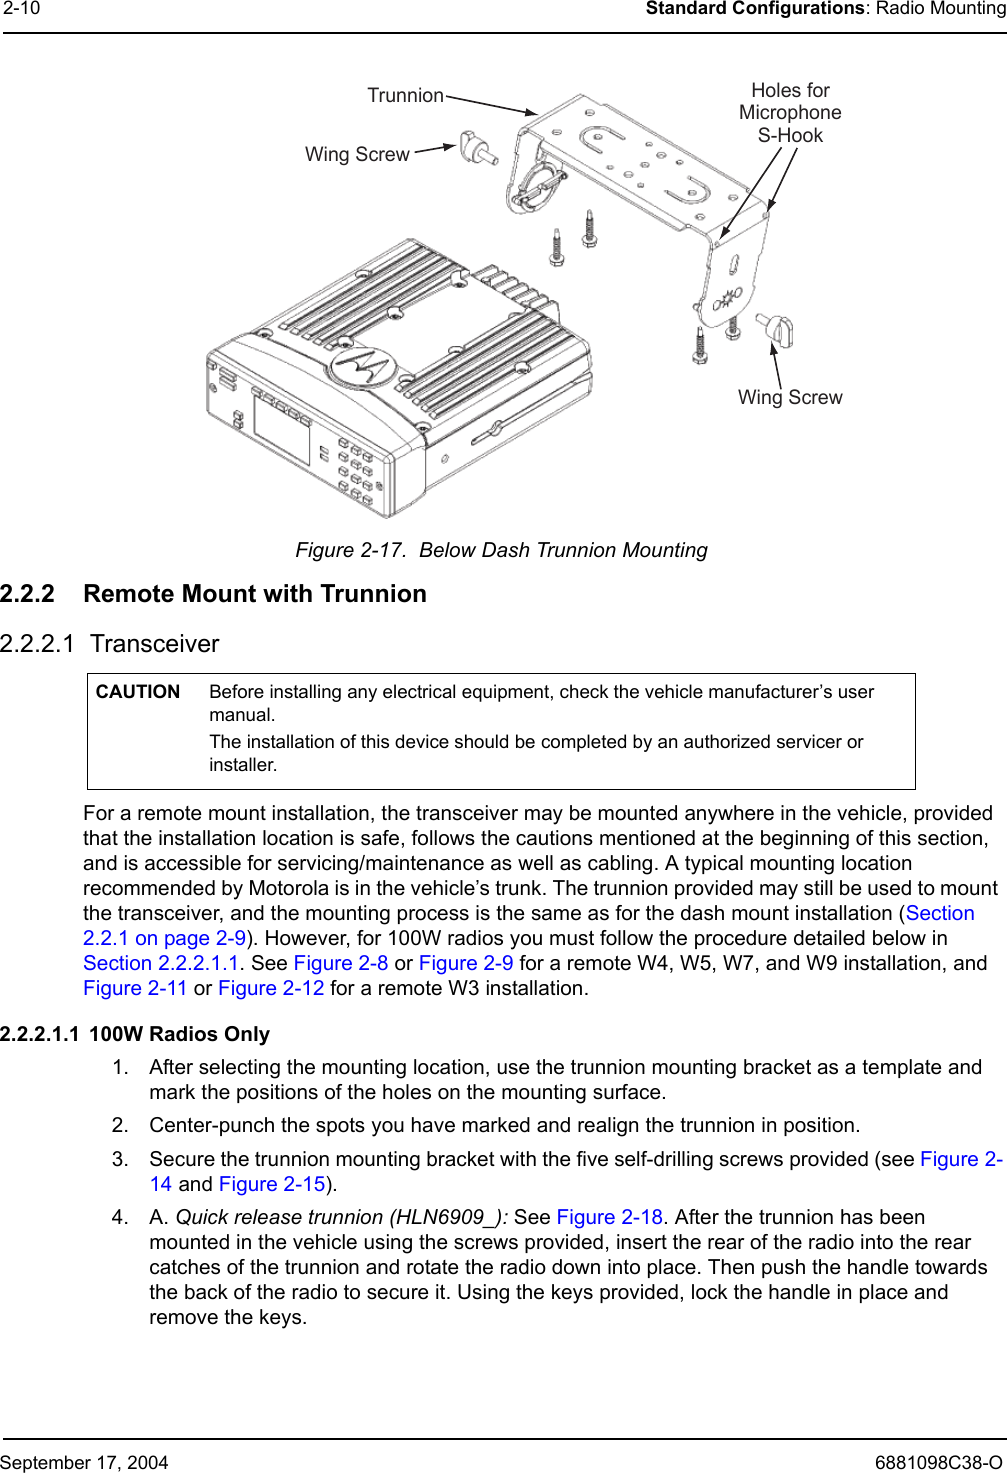 September 17, 2004 6881098C38-O2-10 Standard Configurations: Radio MountingFigure 2-17.  Below Dash Trunnion Mounting2.2.2 Remote Mount with Trunnion2.2.2.1  TransceiverFor a remote mount installation, the transceiver may be mounted anywhere in the vehicle, provided that the installation location is safe, follows the cautions mentioned at the beginning of this section, and is accessible for servicing/maintenance as well as cabling. A typical mounting location recommended by Motorola is in the vehicle’s trunk. The trunnion provided may still be used to mount the transceiver, and the mounting process is the same as for the dash mount installation (Section 2.2.1 on page 2-9). However, for 100W radios you must follow the procedure detailed below in Section 2.2.2.1.1. See Figure 2-8 or Figure 2-9 for a remote W4, W5, W7, and W9 installation, and Figure 2-11 or Figure 2-12 for a remote W3 installation.2.2.2.1.1  100W Radios Only1. After selecting the mounting location, use the trunnion mounting bracket as a template and mark the positions of the holes on the mounting surface.2. Center-punch the spots you have marked and realign the trunnion in position.3. Secure the trunnion mounting bracket with the five self-drilling screws provided (see Figure 2-14 and Figure 2-15).4. A. Quick release trunnion (HLN6909_): See Figure 2-18. After the trunnion has been mounted in the vehicle using the screws provided, insert the rear of the radio into the rear catches of the trunnion and rotate the radio down into place. Then push the handle towards the back of the radio to secure it. Using the keys provided, lock the handle in place and remove the keys. CAUTION Before installing any electrical equipment, check the vehicle manufacturer’s user manual.  The installation of this device should be completed by an authorized servicer or installer.TrunnionWingScrewWingScrewHolesforMicrophoneS-Hook